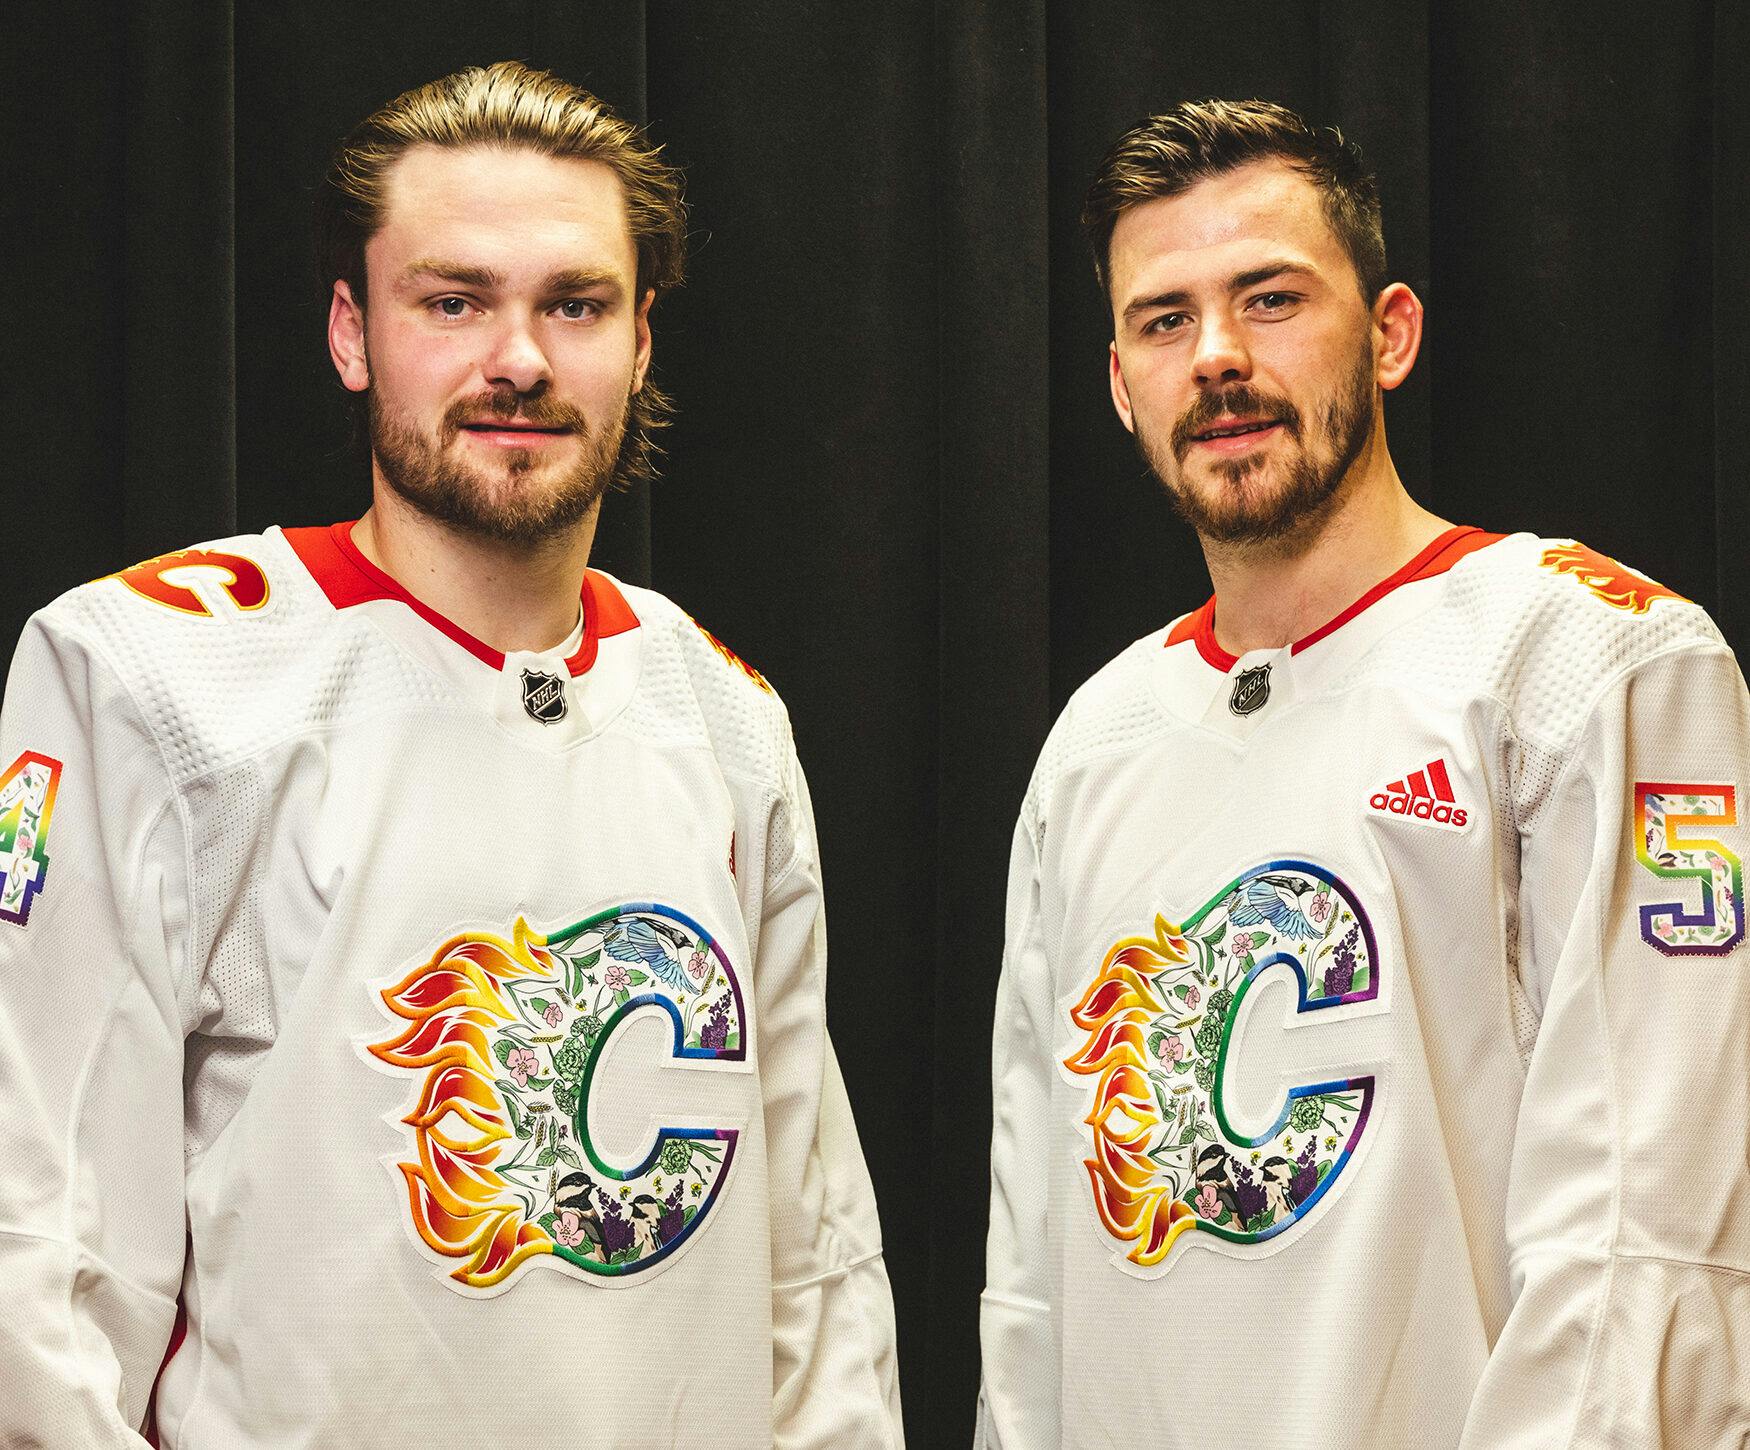 Calgary Flames] We're proud to reveal our 2023 Pride Night jersey, designed  by local artist Megan Parker! We'll be wearing these amazing jerseys during  warm-ups ahead of our Mar. 28 game vs.